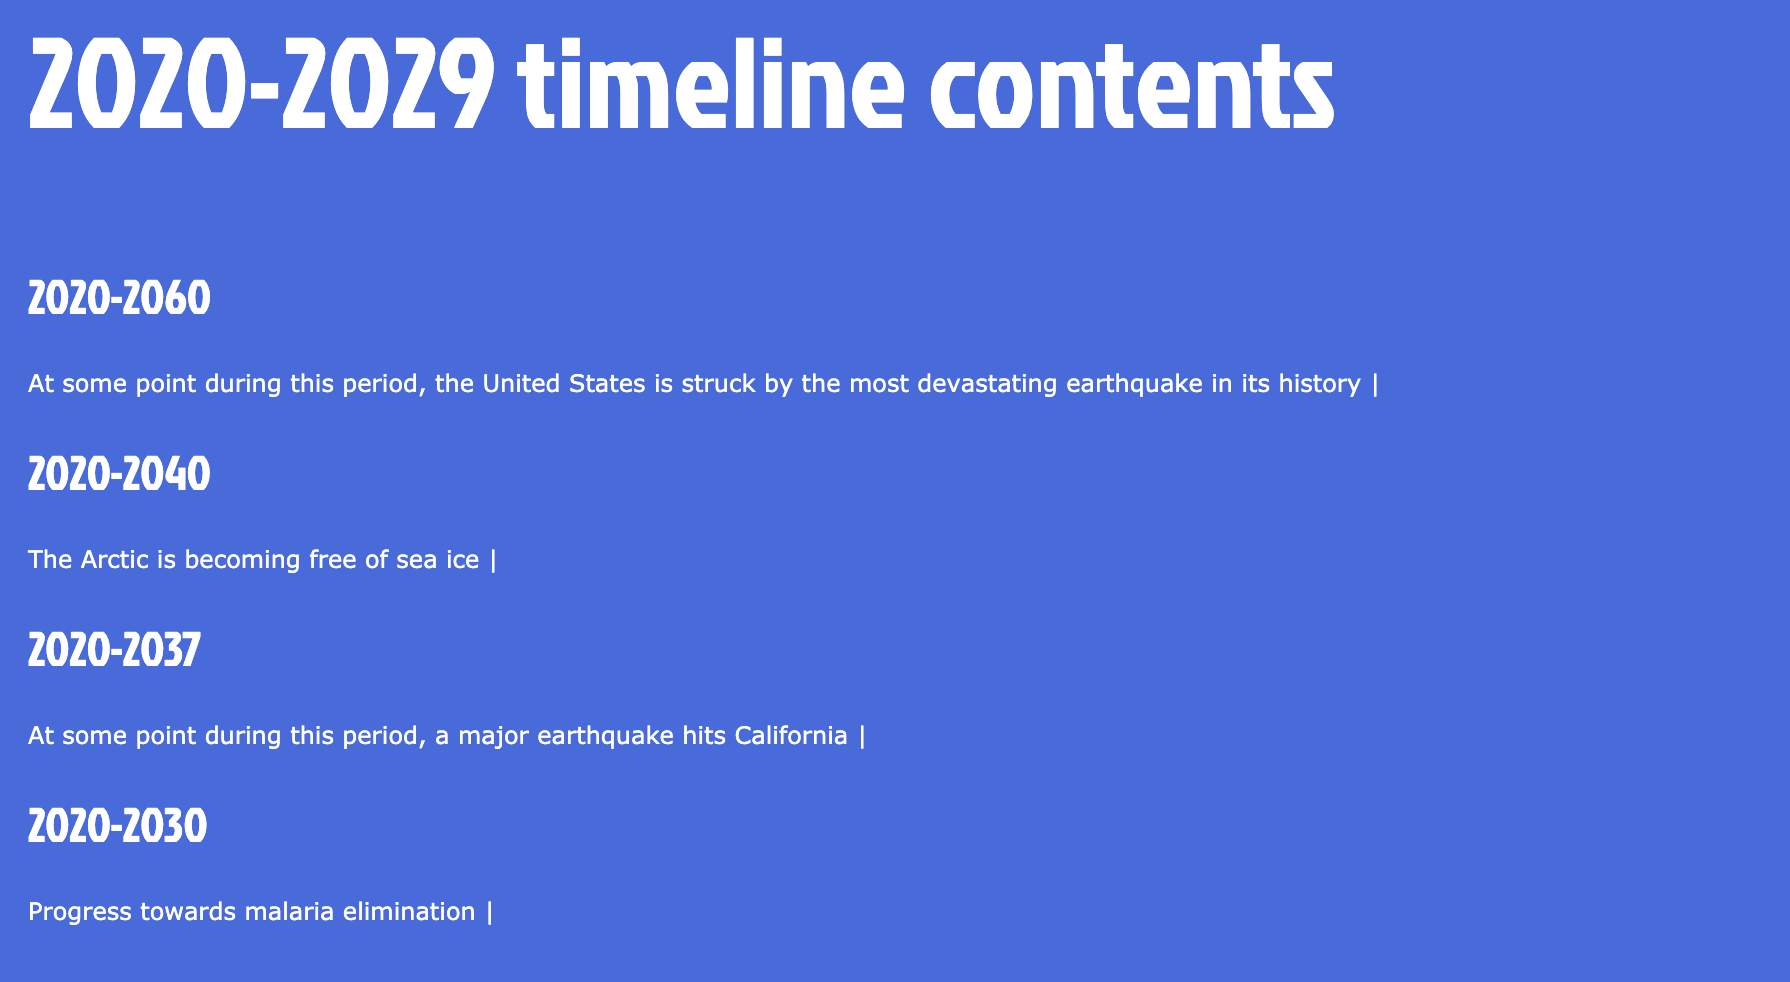 2020-2029 timeline contents, stating that the Arctic is becoming free of sea ice and that a major earthquake will hit, while we&#x27;ll progress towards eliminating malaria